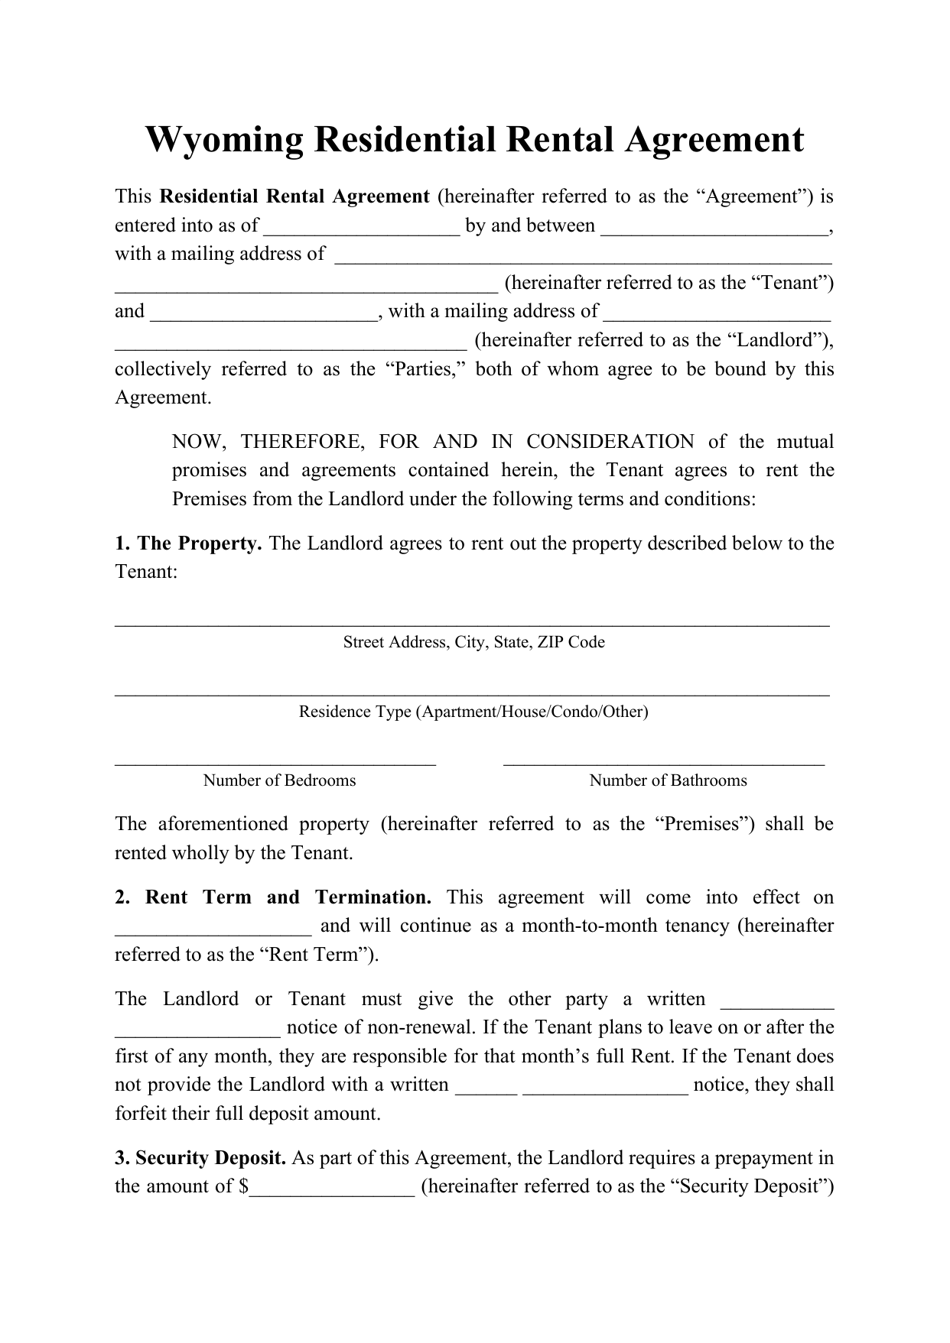 Residential Rental Agreement Template - Wyoming, Page 1